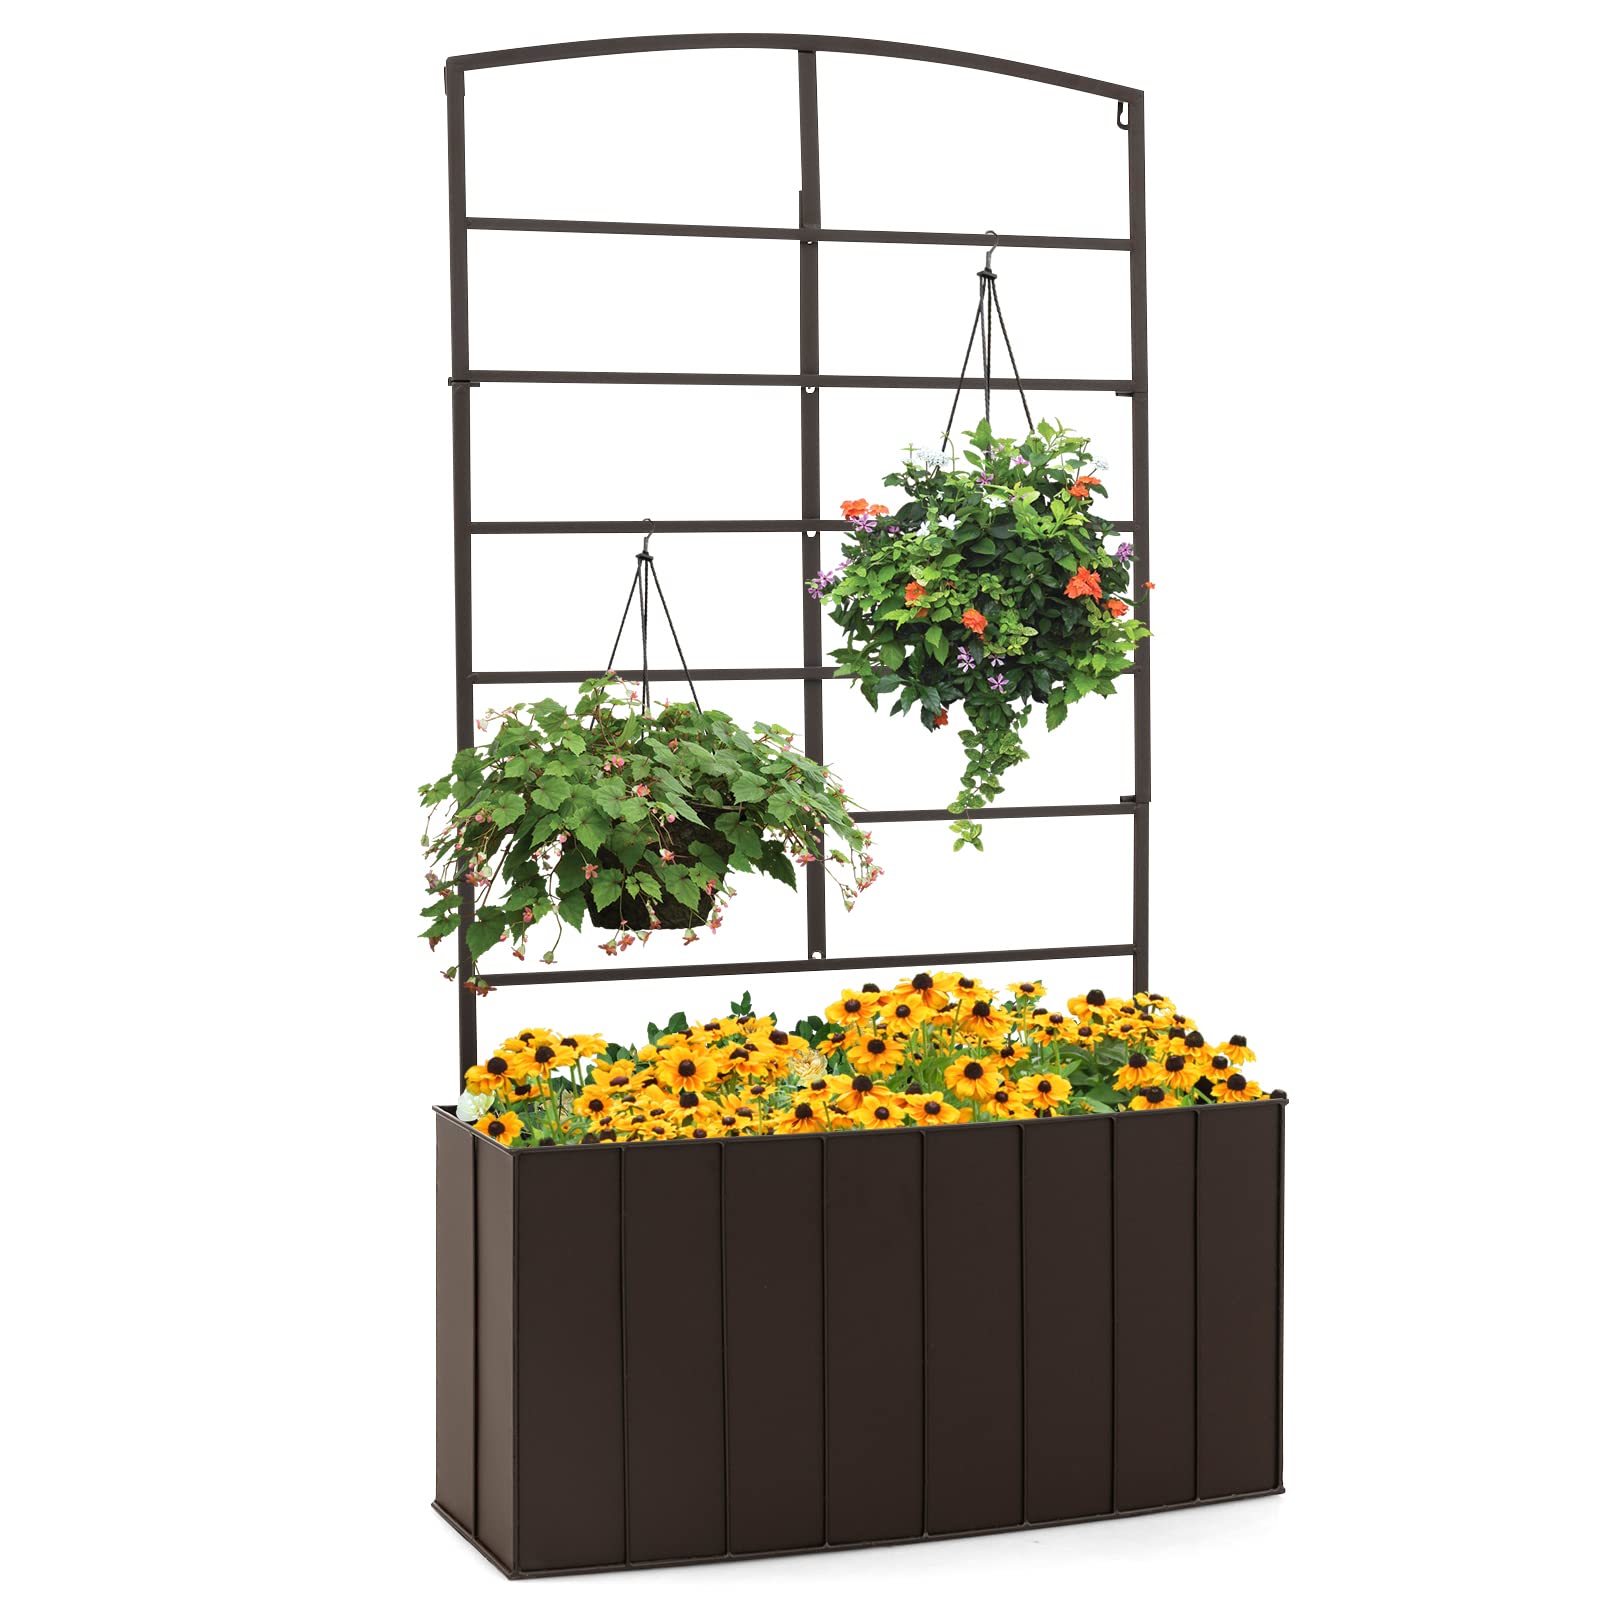 Giantex Raised Garden Bed with Trellis, Vertical Bed Box with Lattice for Vine Flowers Climbing or Hanging